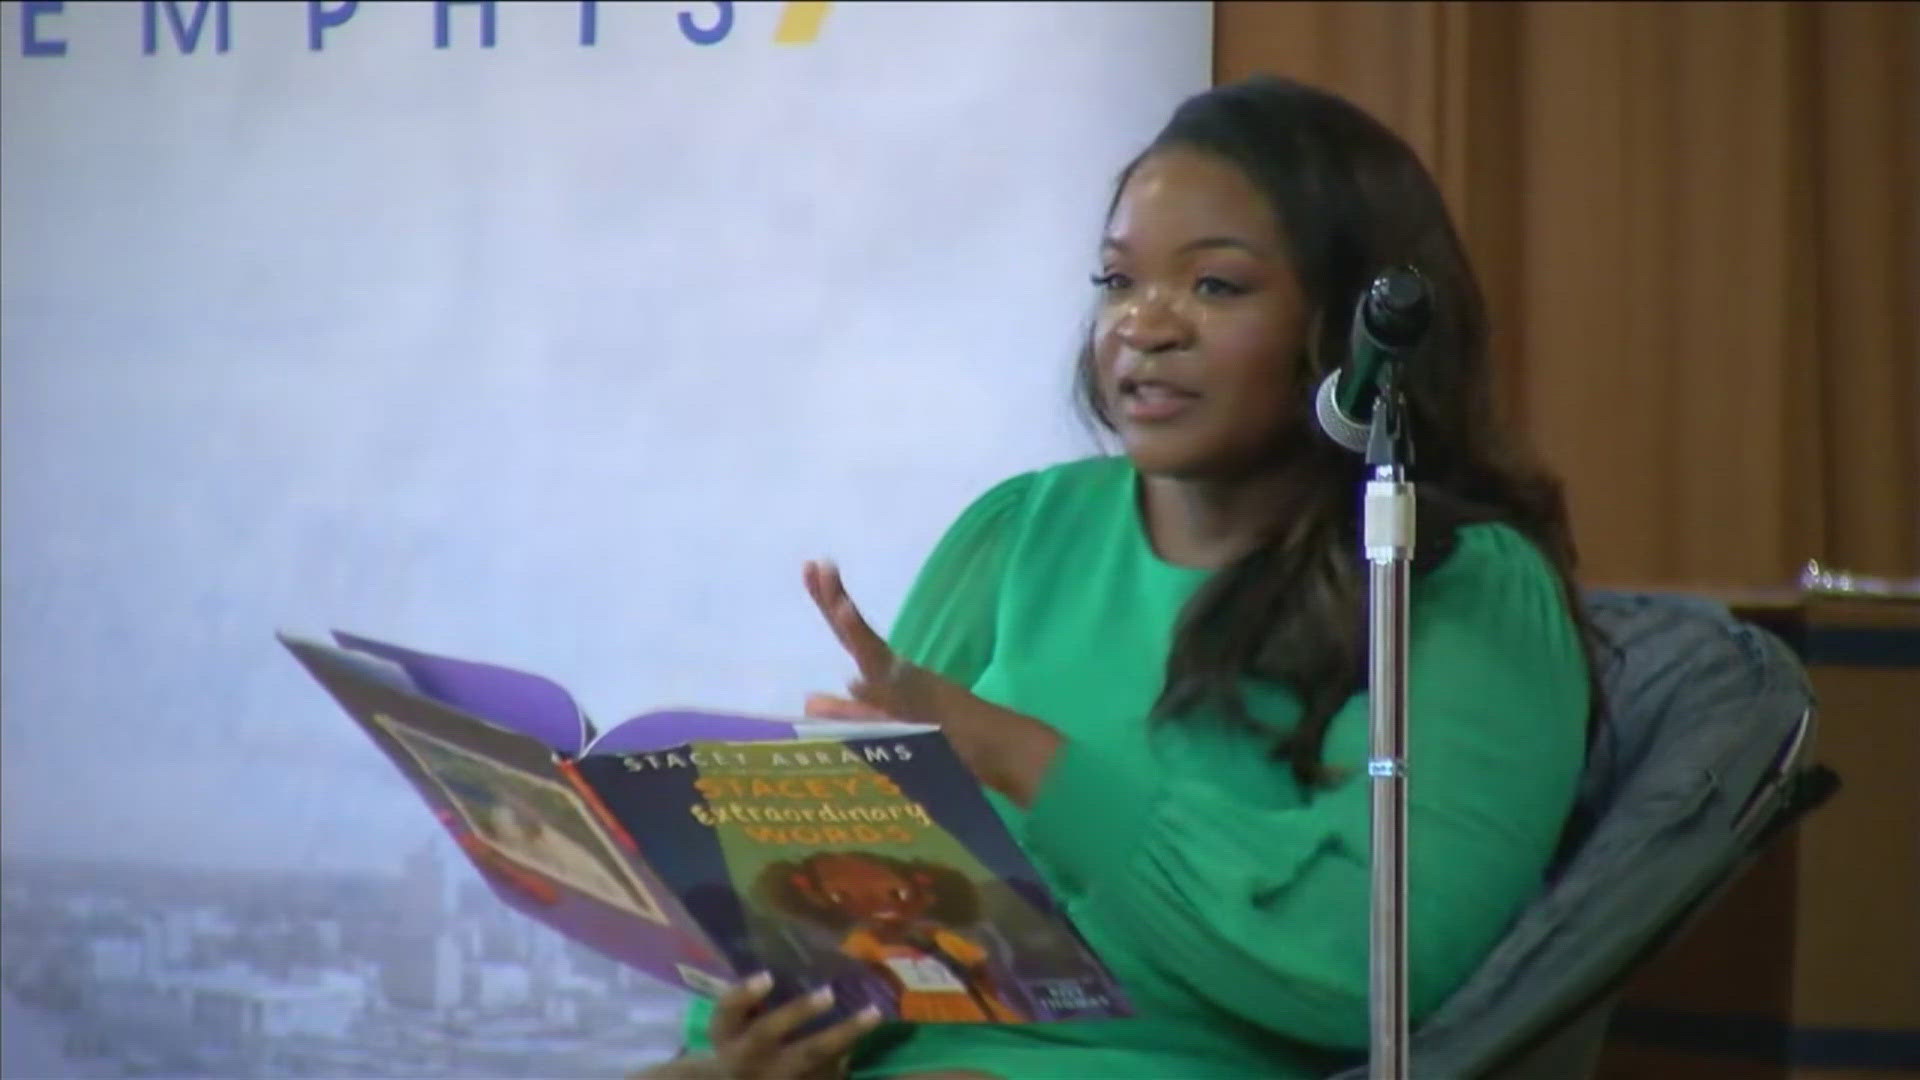 The event featured ABC24's second annual book giveaway under the station's "Reading Wizard" program.